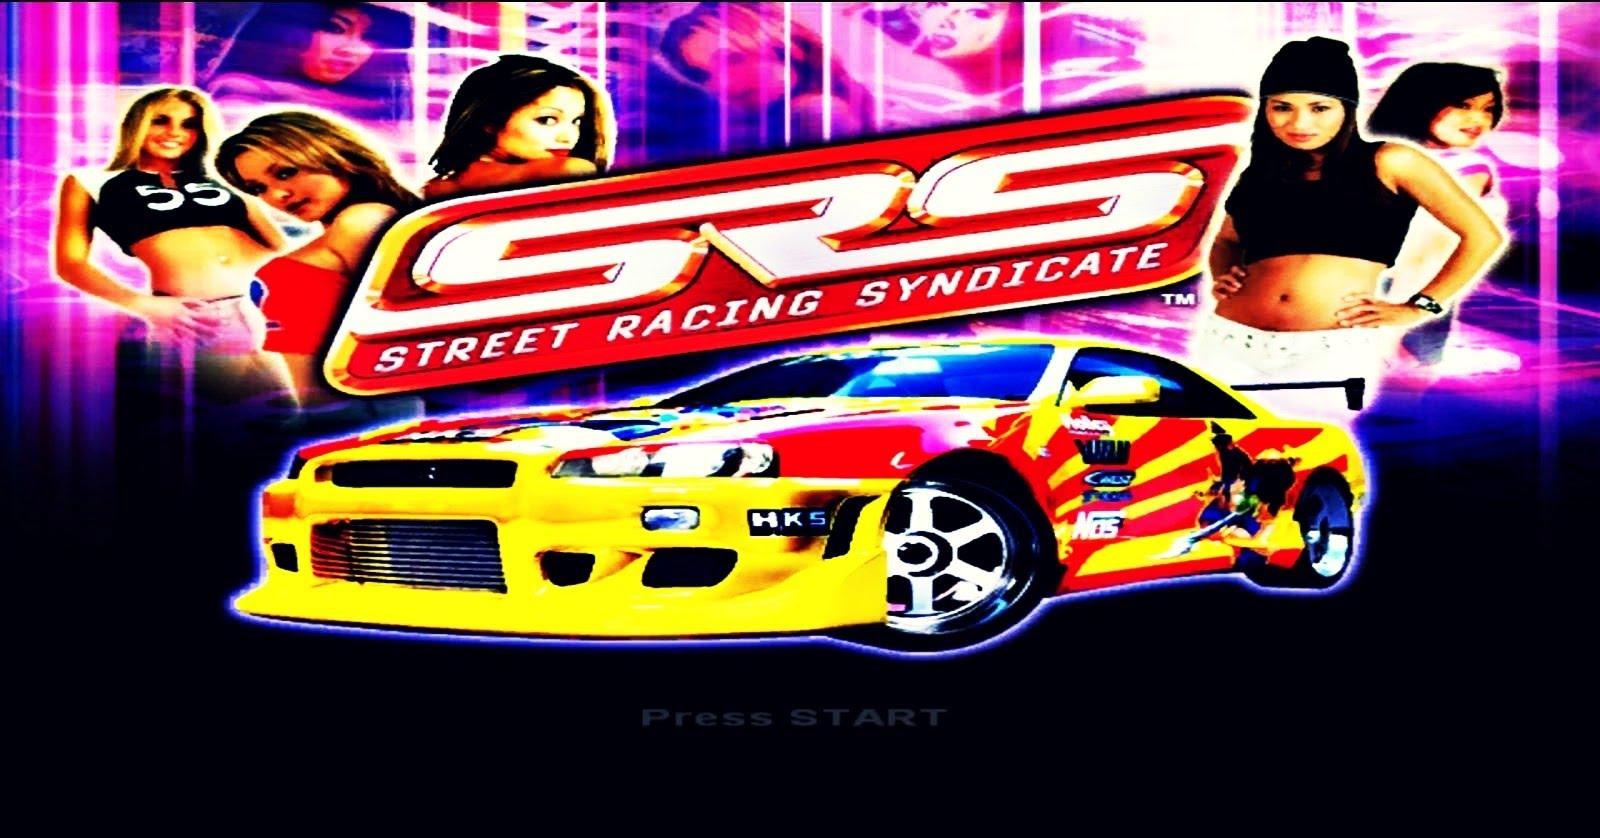 Street Racing Syndicate Pics, Video Game Collection